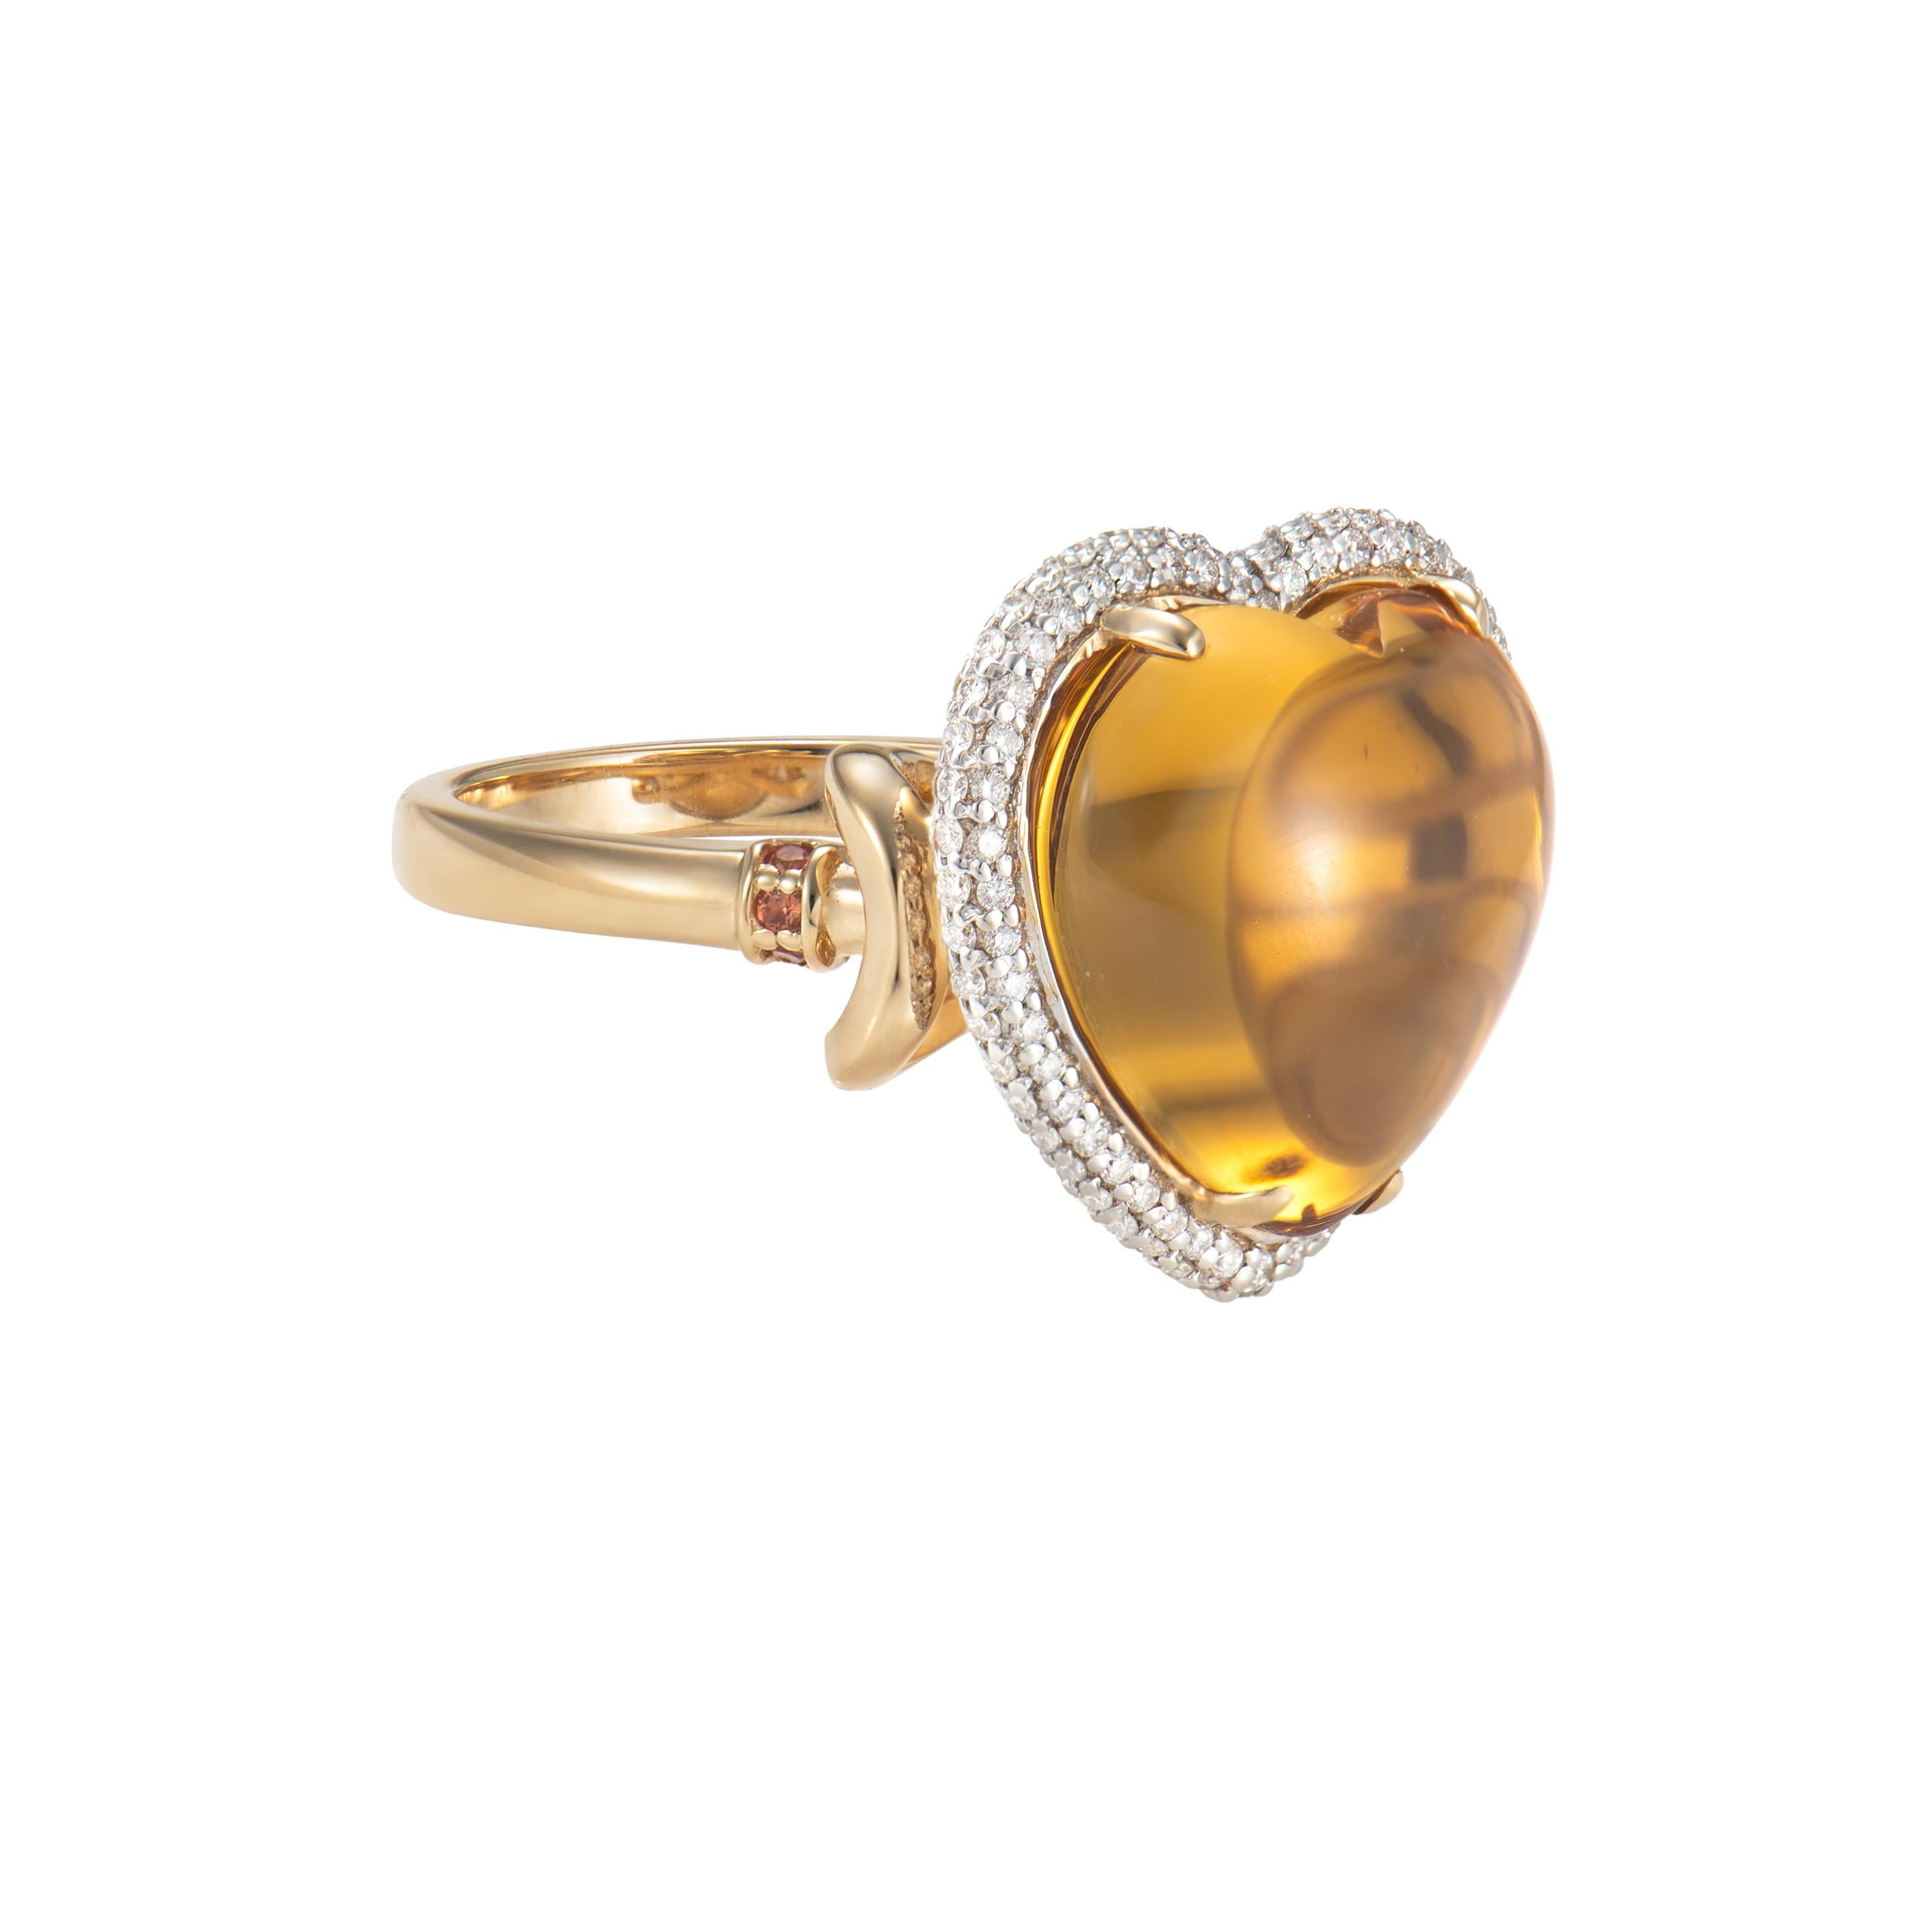 Celebrating the season of love with these delicate heart jewels! These pieces showcase beautiful gemstones with dainty accents to elevatue the beauty of the gem. 

Honey Quartz Ring in 18 Karat Yellow Gold with Orange Sapphire and White